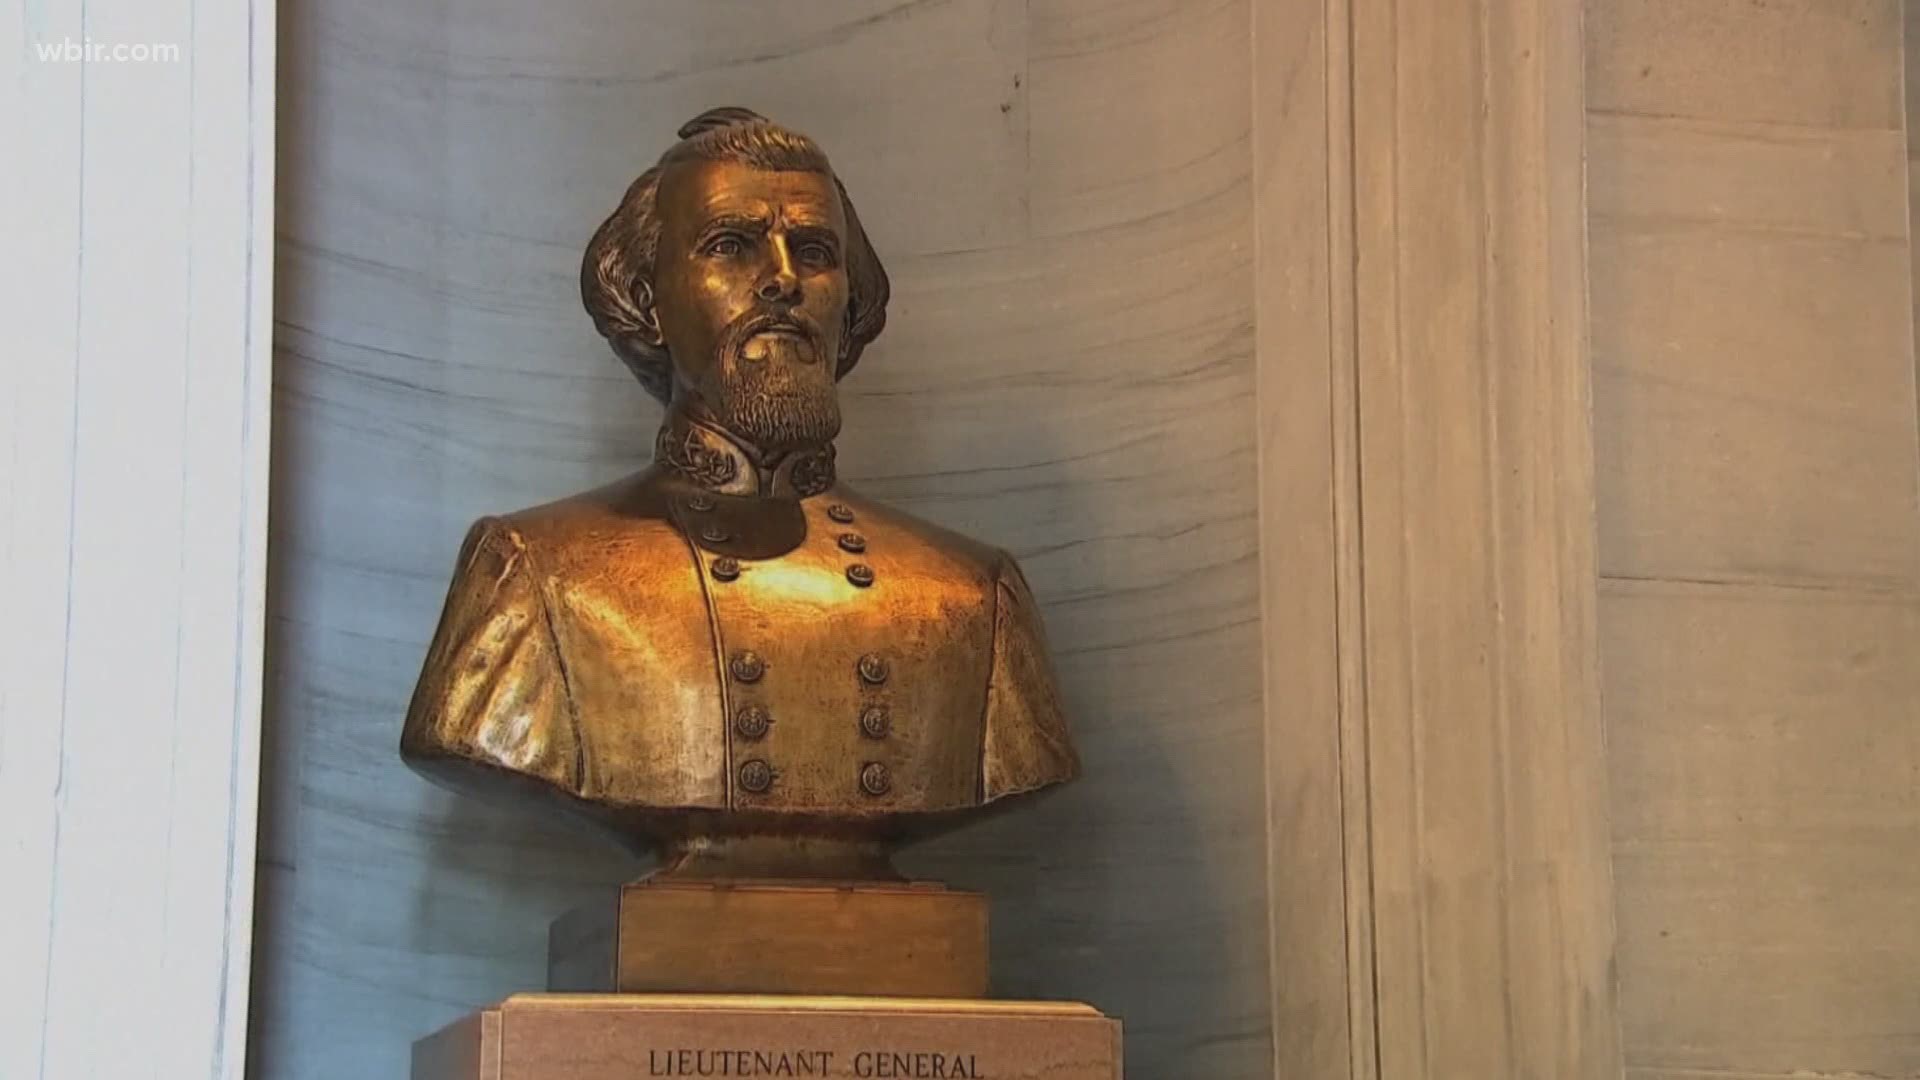 Former Governor Haslam says he believes the removal of the bust from the capitol is a step in the right direction for the state.